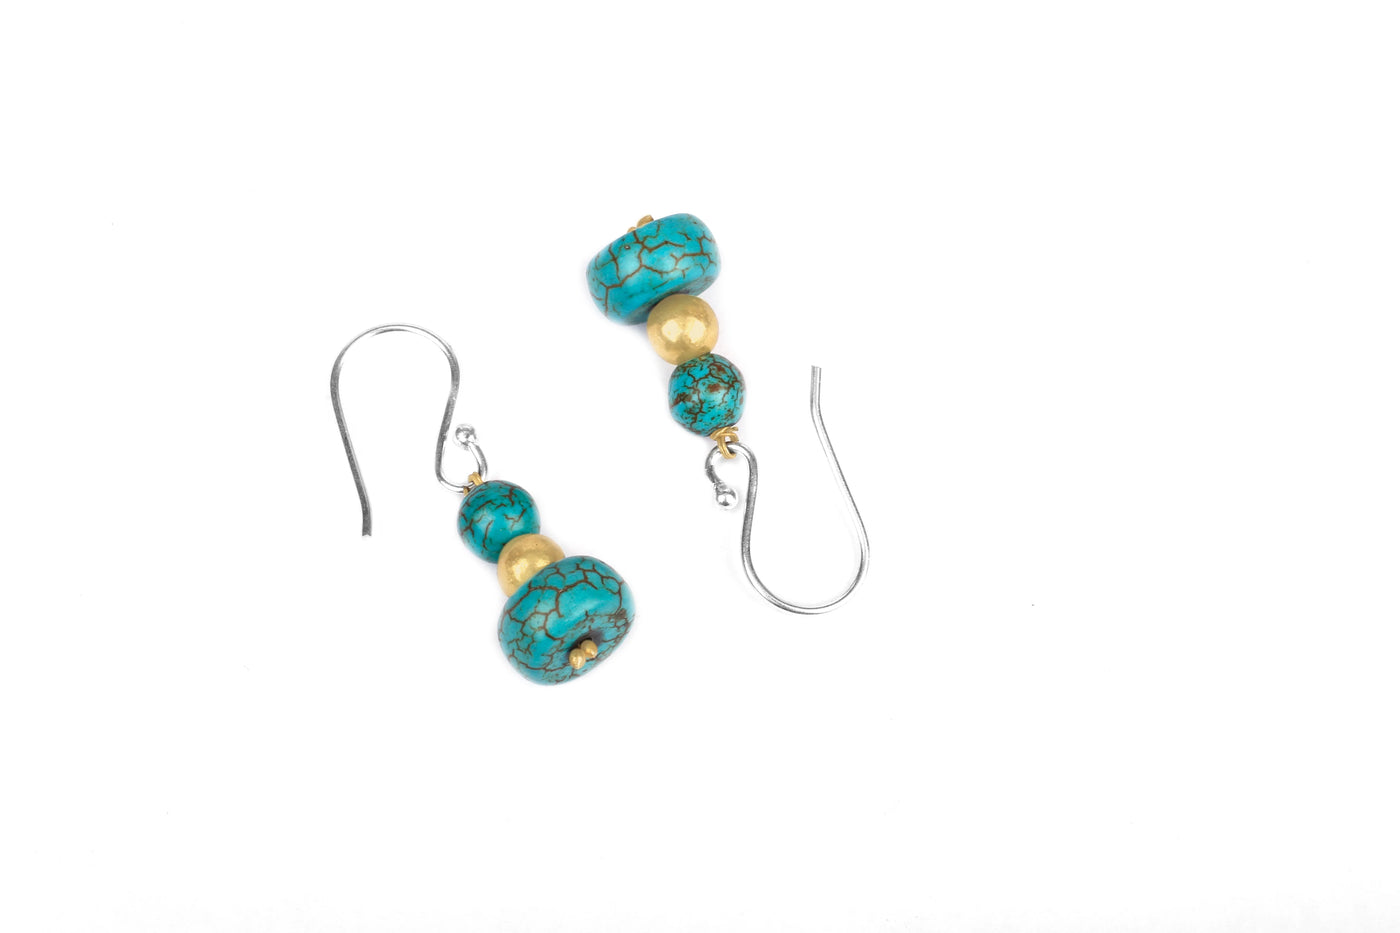 Bisma-Silver-Earrings-With-Turquoise